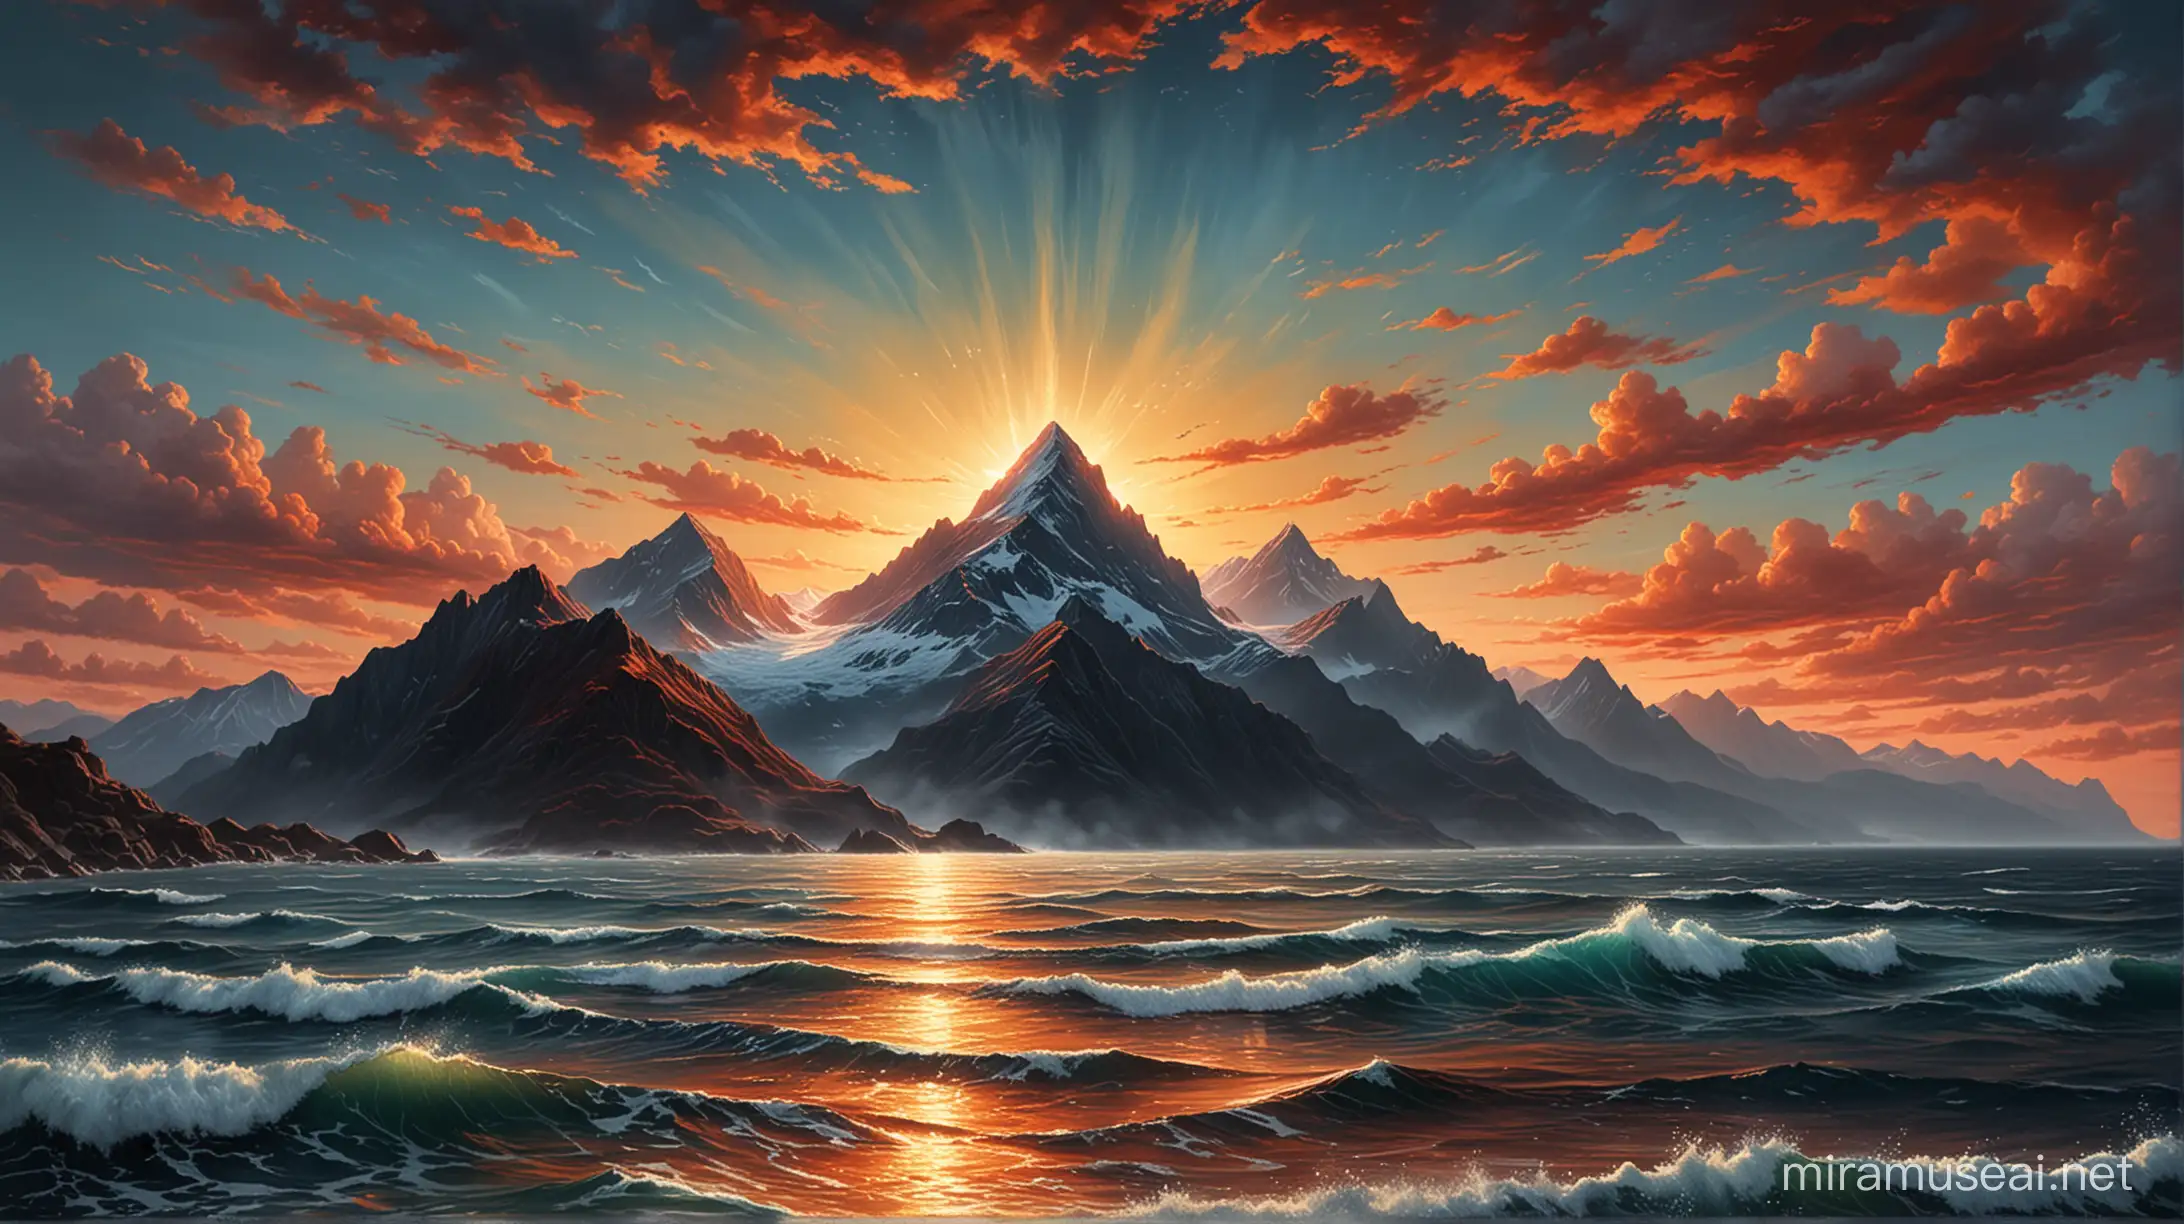 3d digital realistic detailed artist oil painting of a dark sky over the ocean.  Colors of sky are dark teal blue, red, yellow, orange and light blue. The clouds are evenly dispersed..  The Sun is setting over a soft rounded peak mountain range in the middle of the sky and is bright red.  